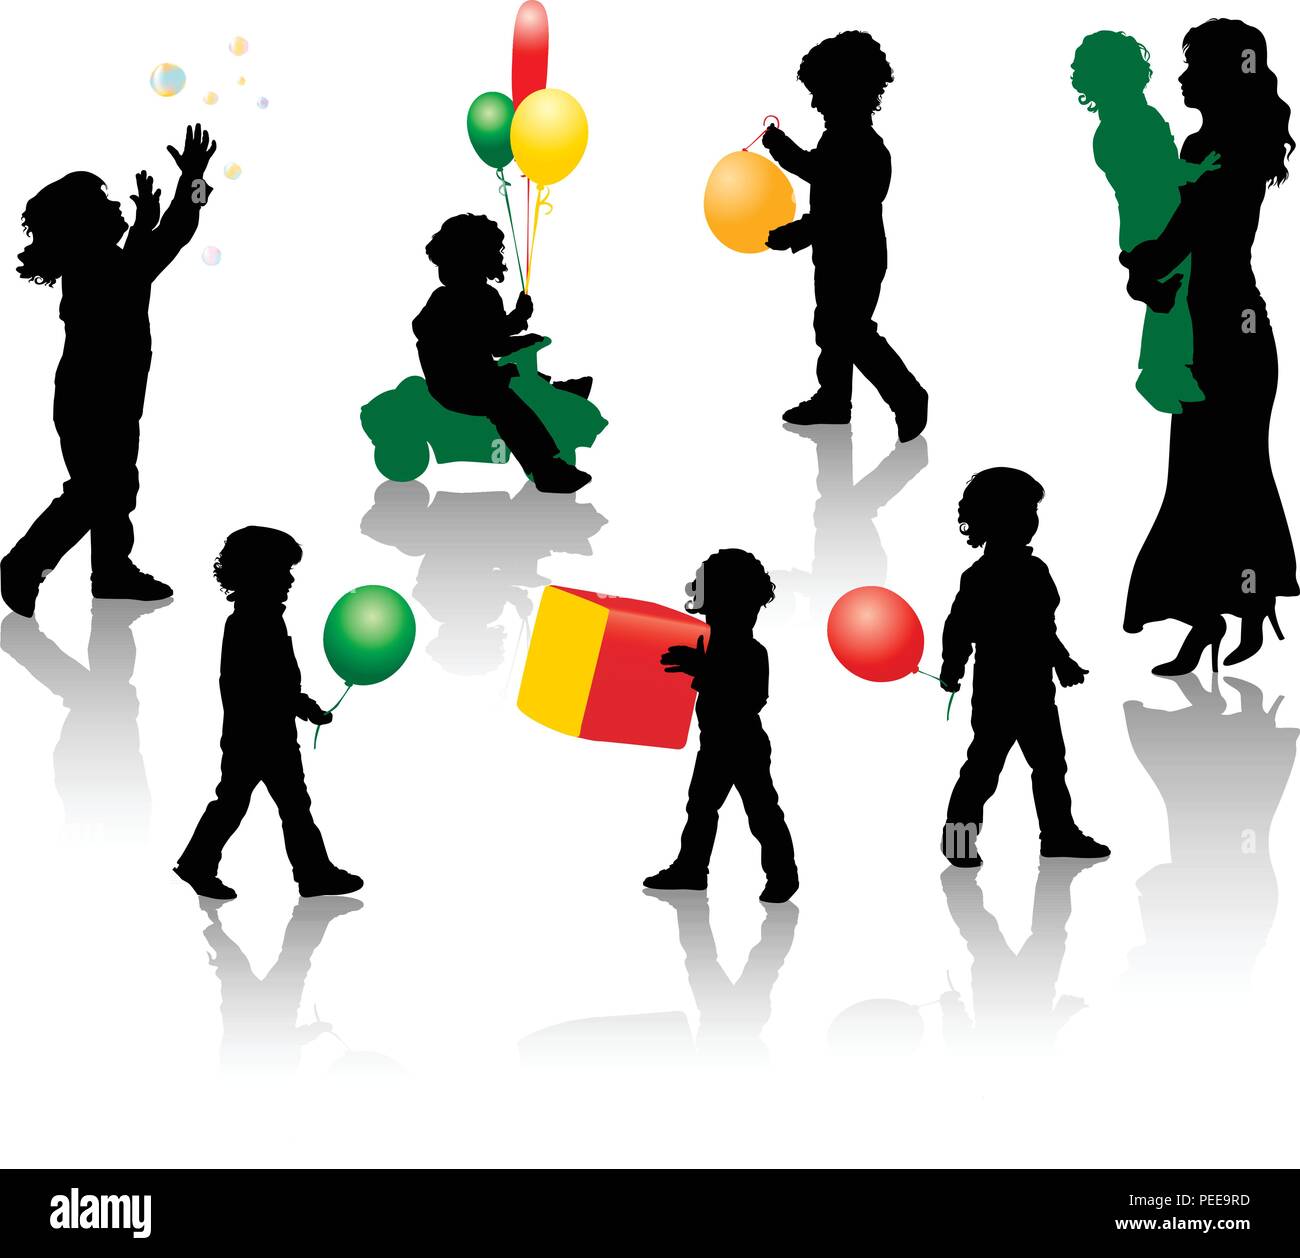 The silhouettes of a boy playing with a balloon, bubbles, toys. Stock Vector